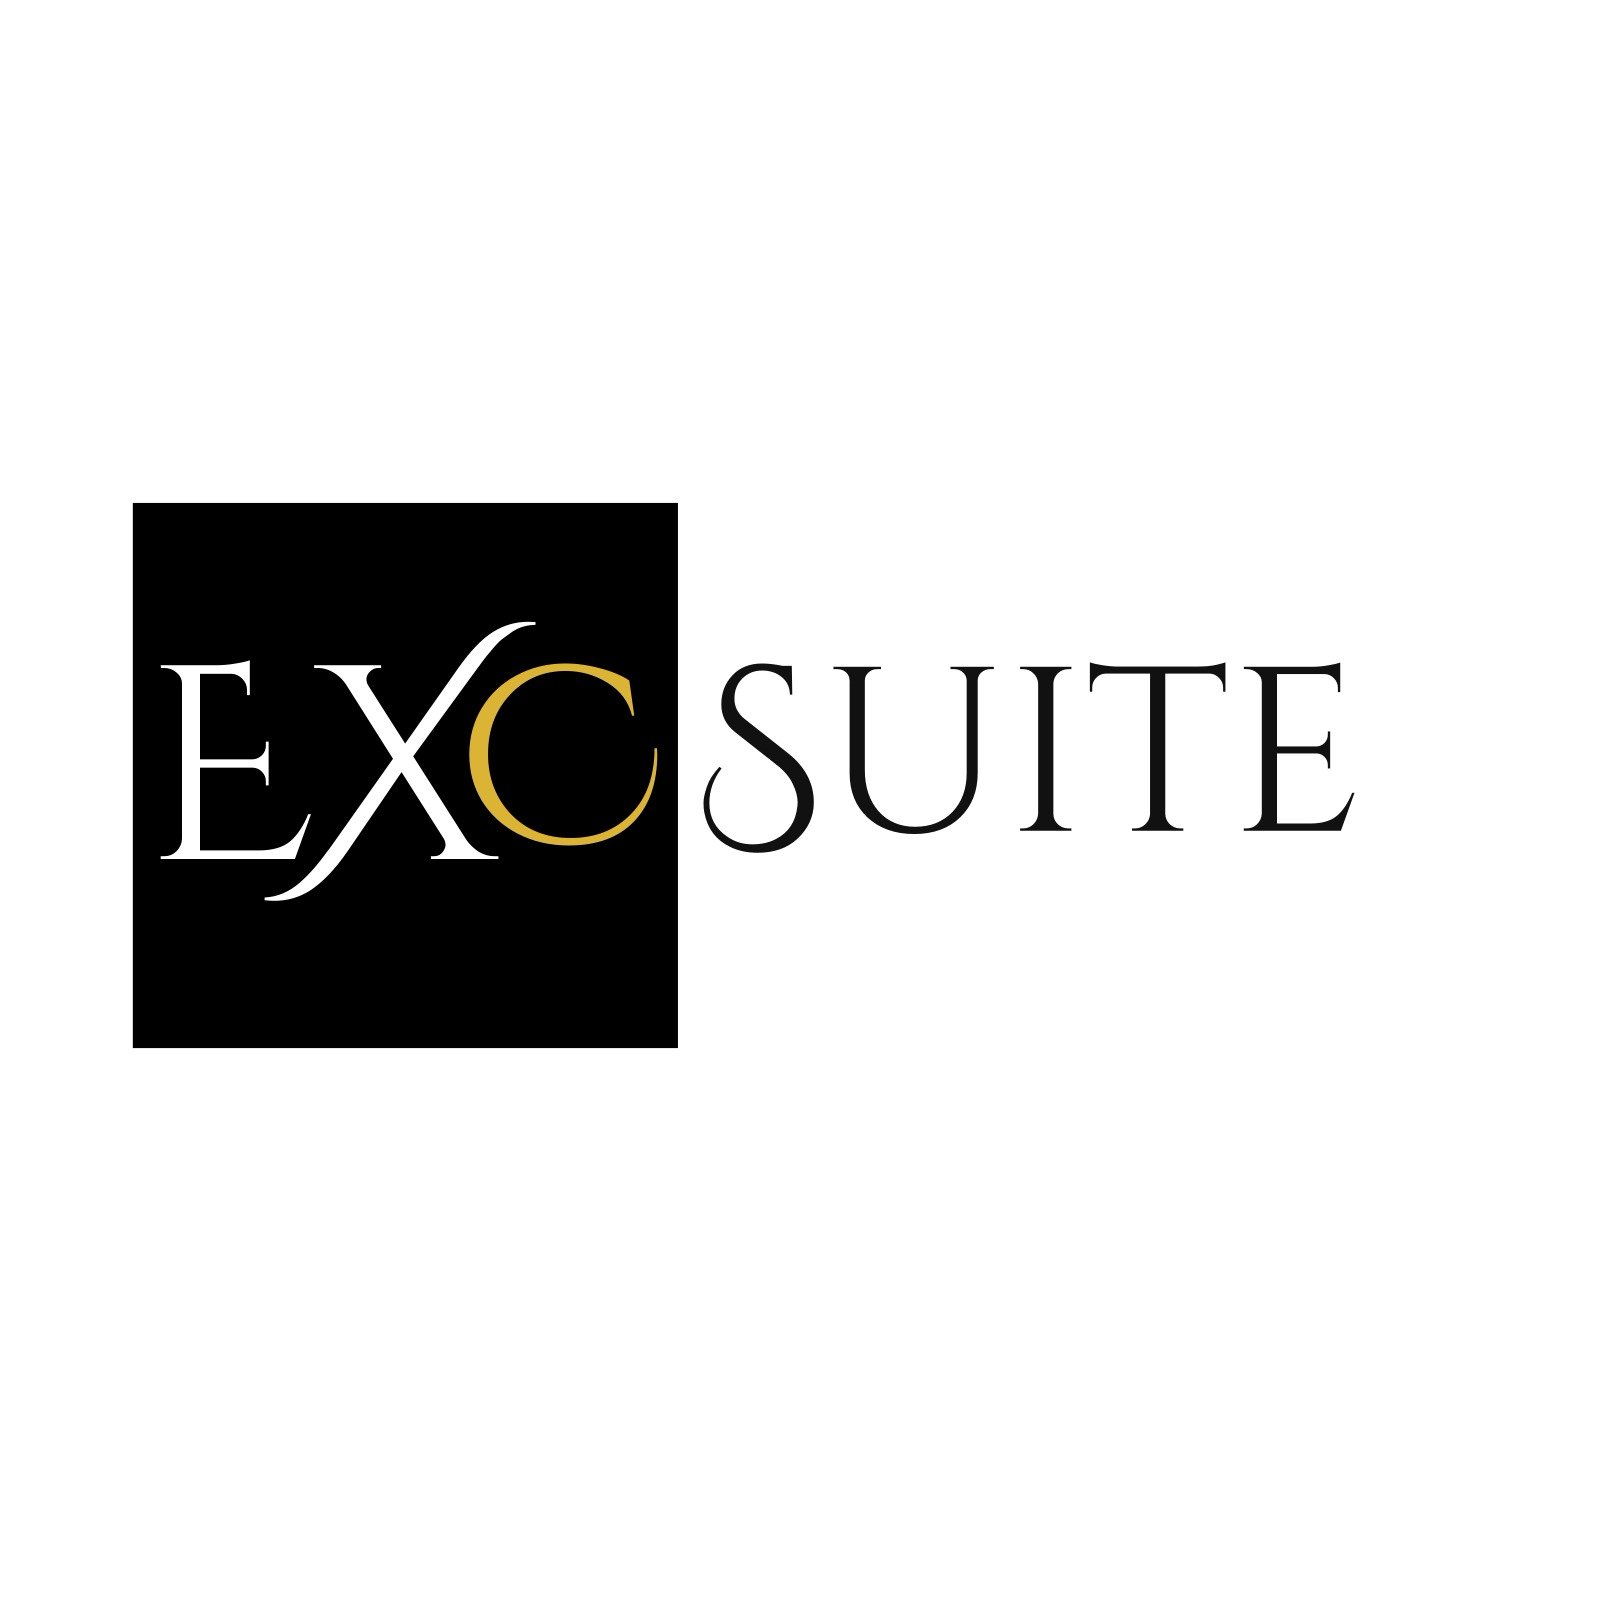 Your Industry's Most Experienced Advisory & Mentoring Services. #excsuite #gigeconomy #futureofwork #retirement #retired #Csuite